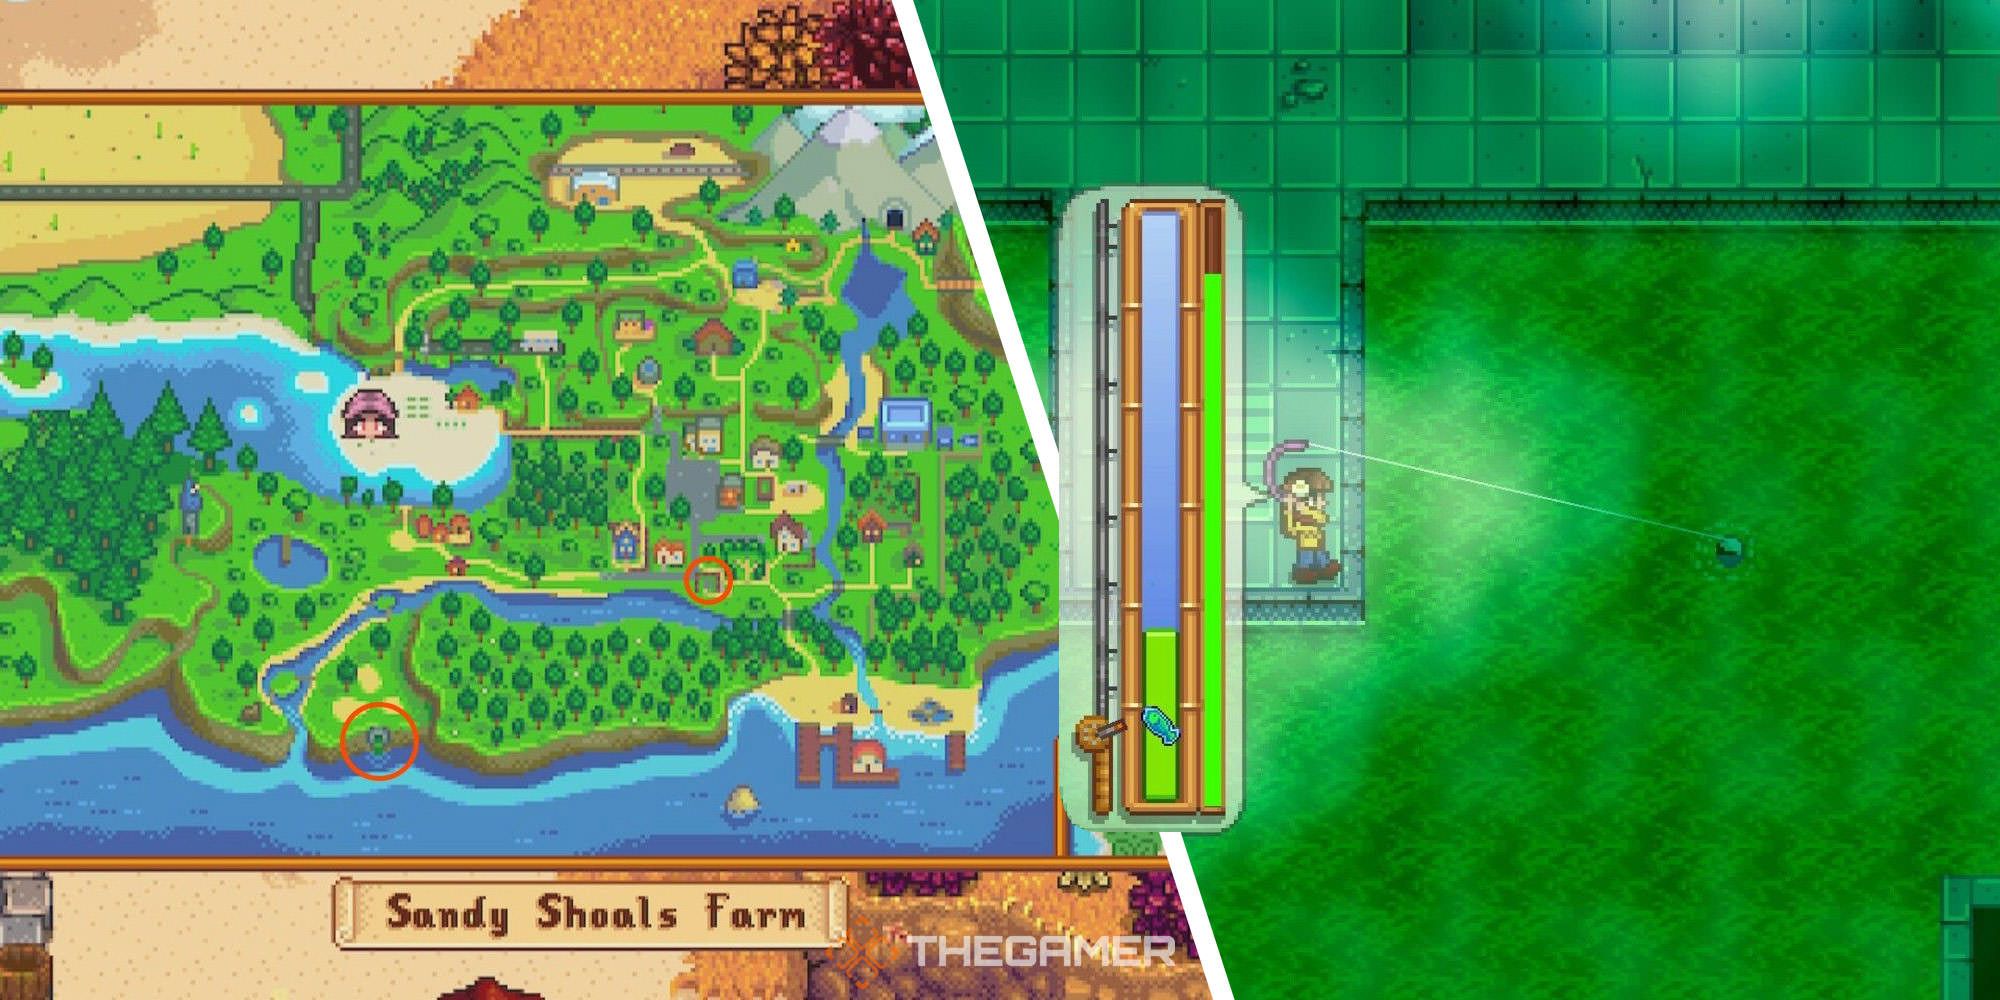 Split image of Stardew Valley's sewer system